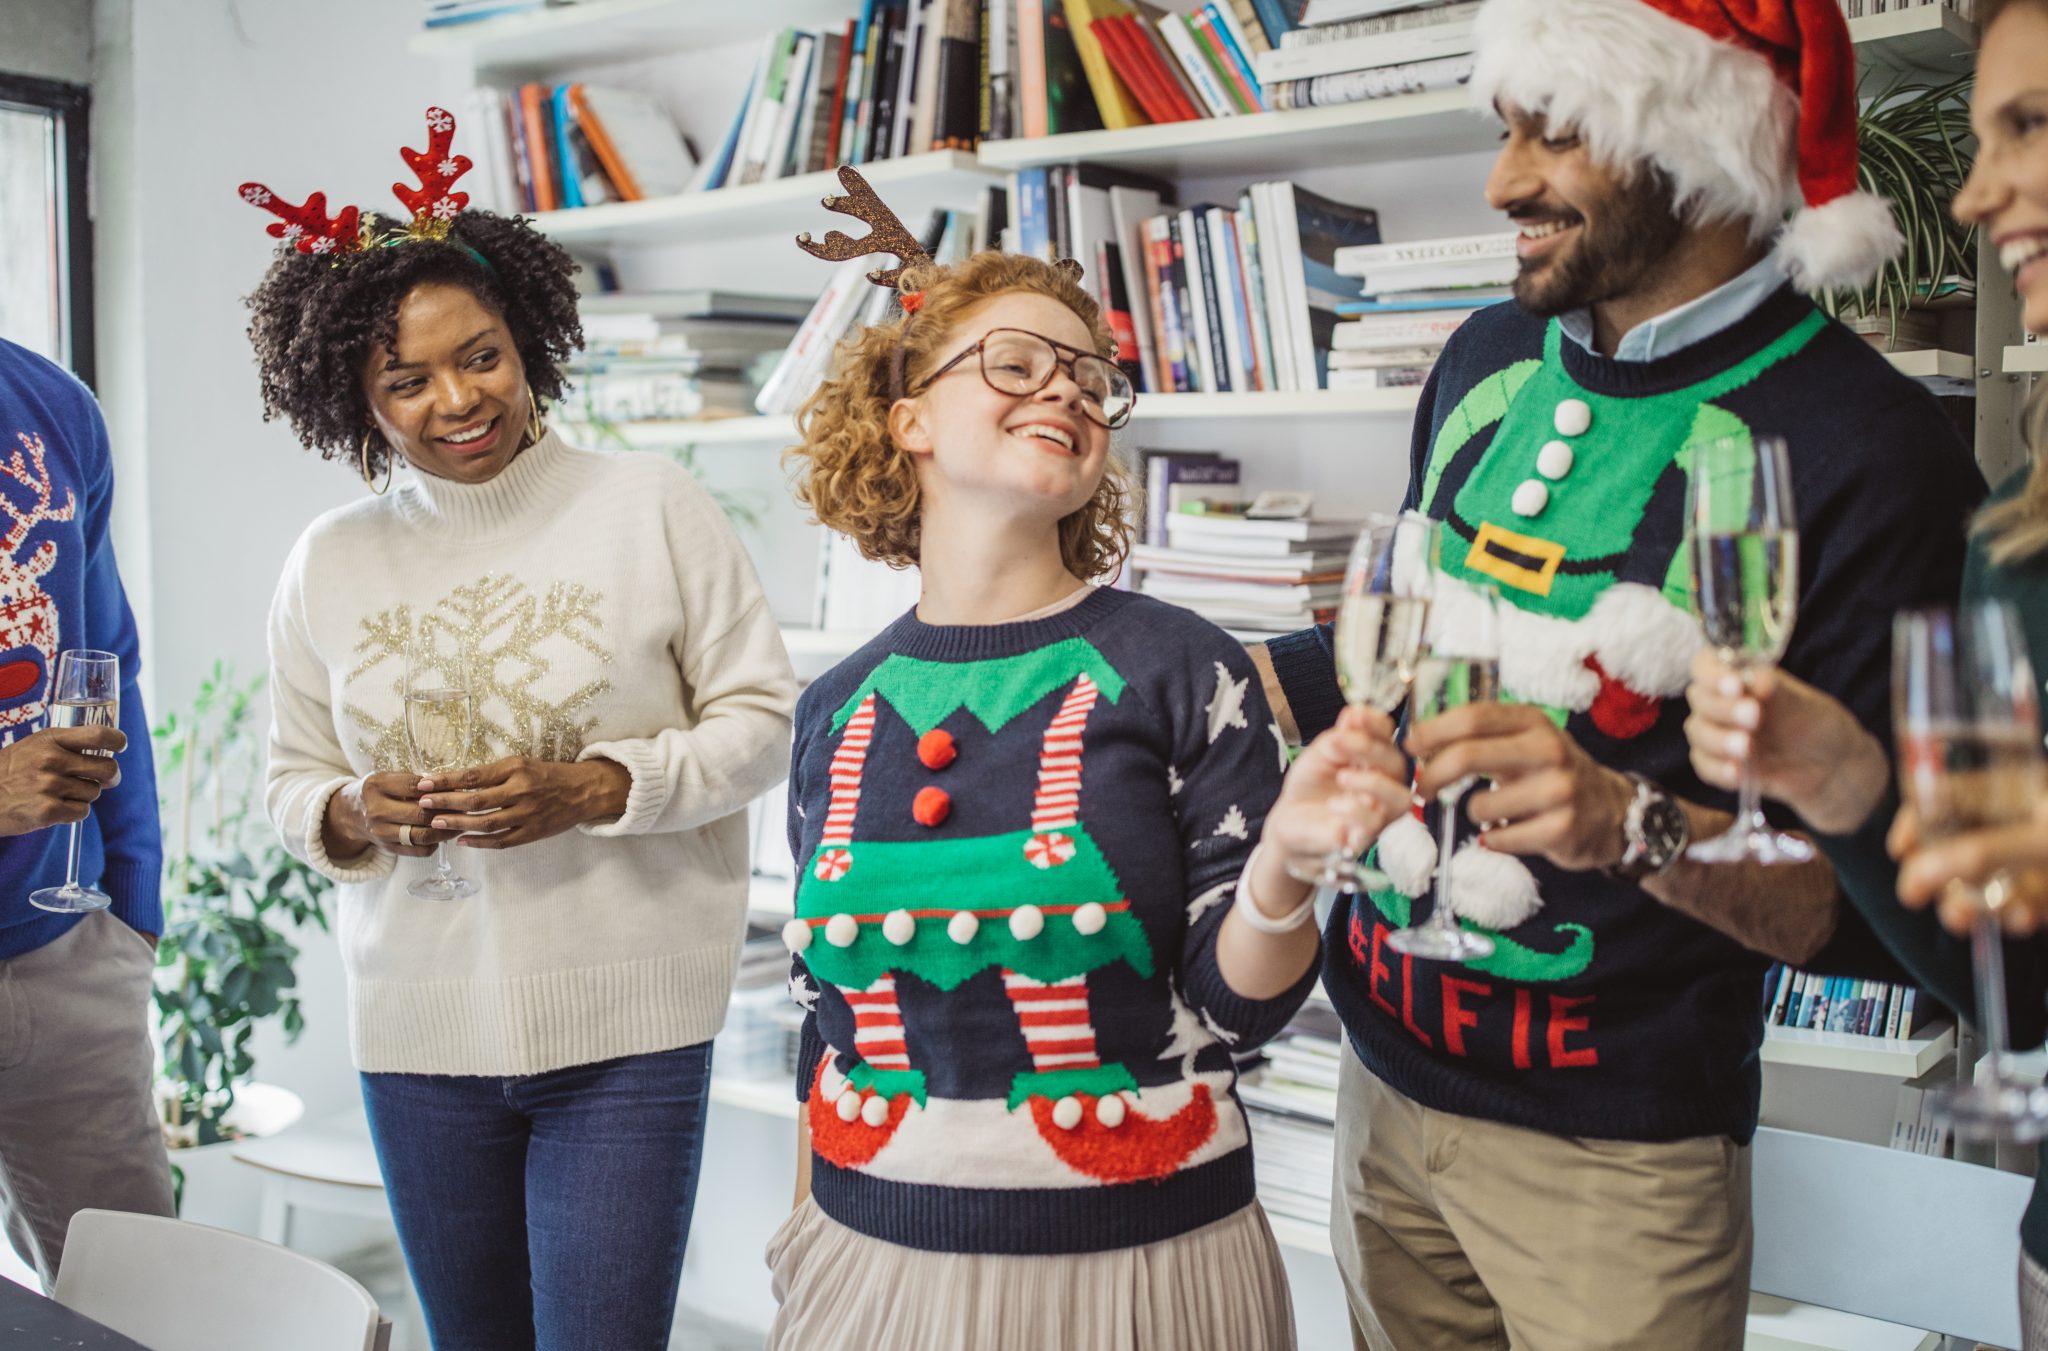 The best Reddit office Christmas party stories